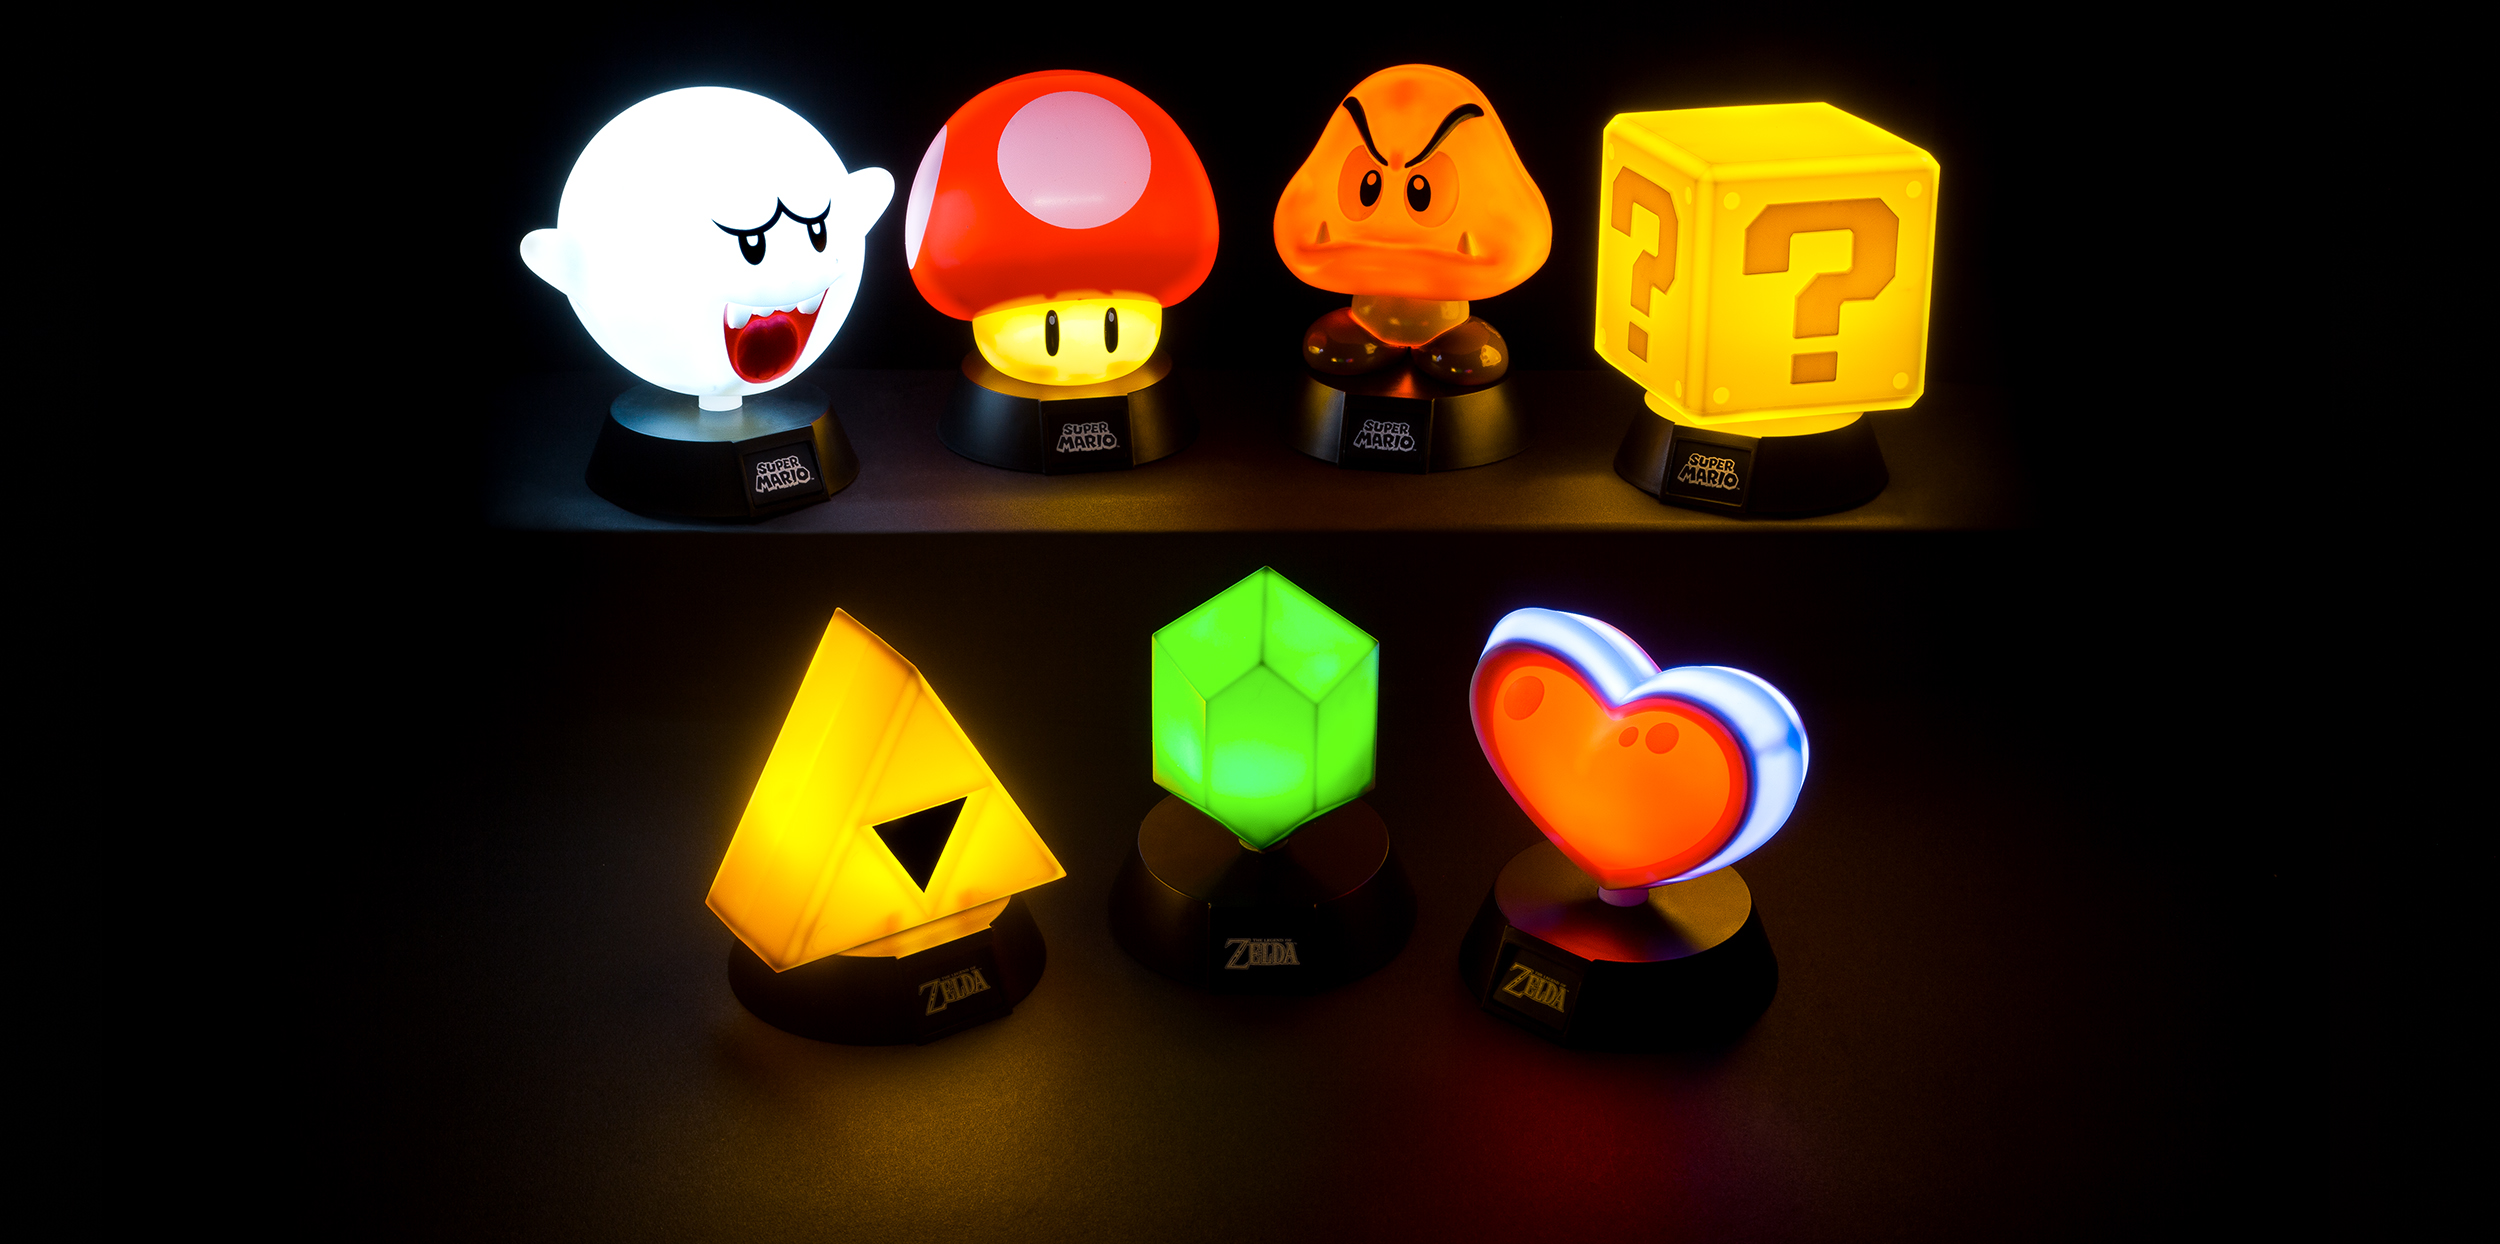 First wave of Paladone’s new Icon Lights range is all about Nintendo